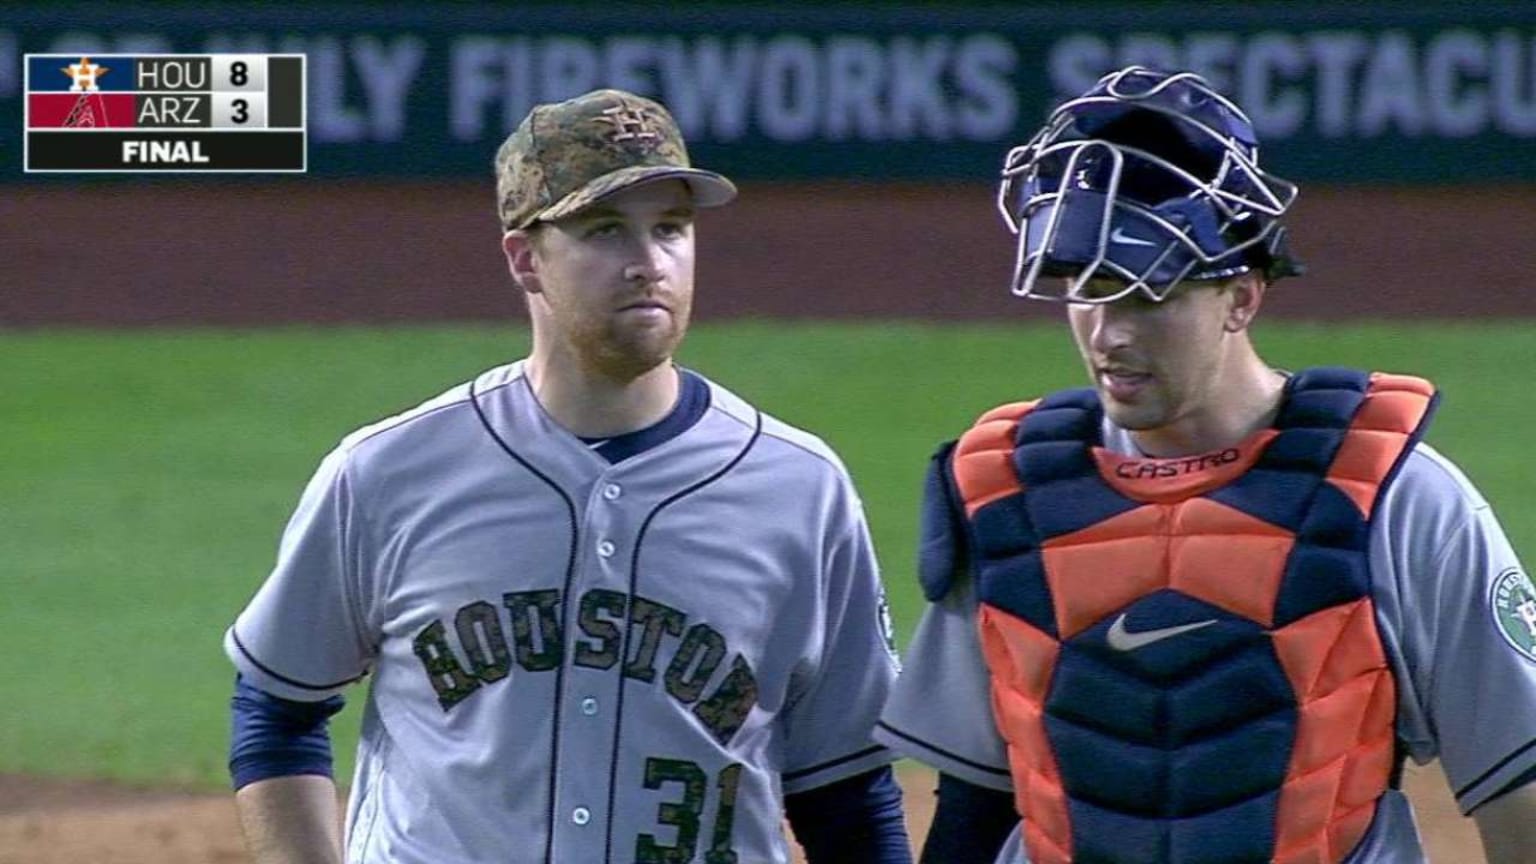 MLB - To infinity and beyond. These Houston Astros City